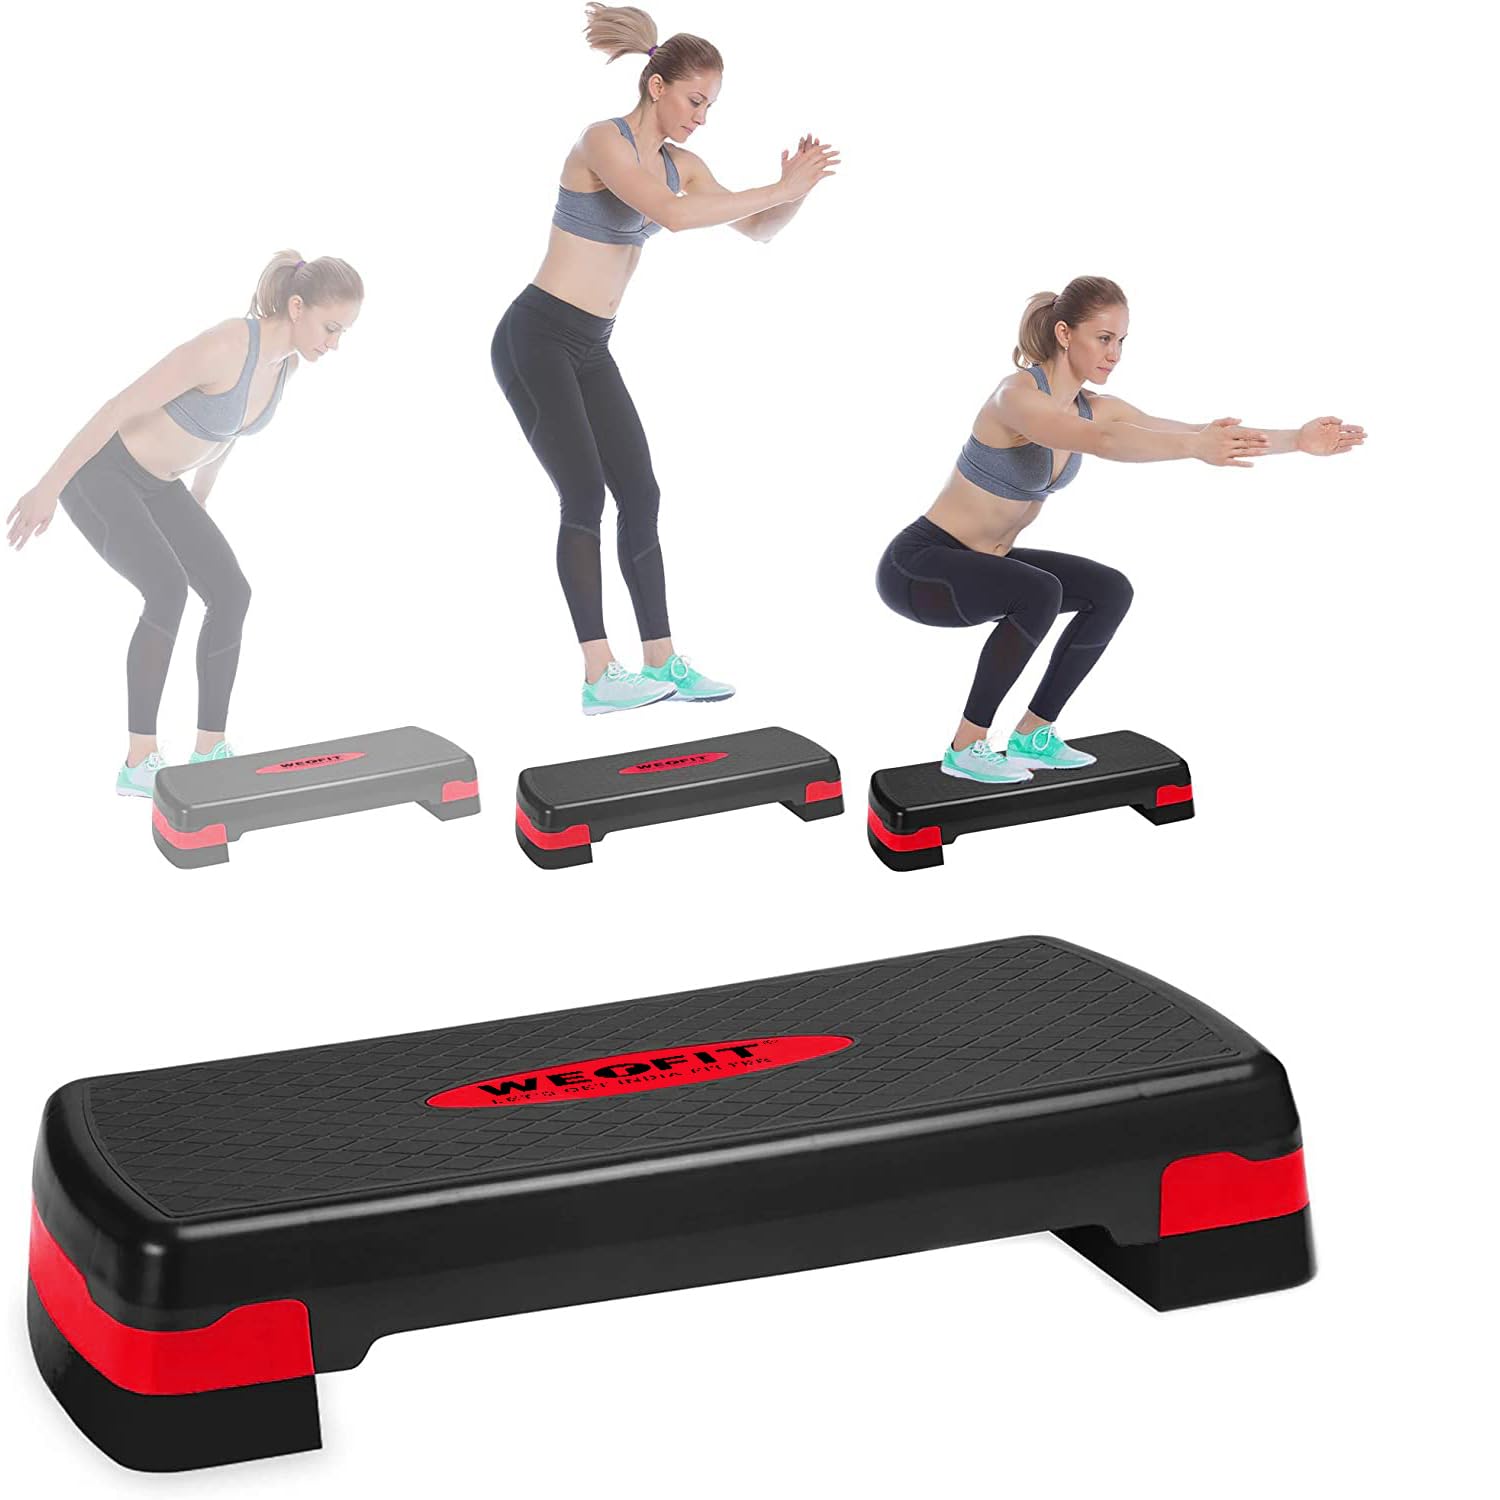 Aerobic Stepper for Cardio Workout with 4 Anti-Skid Rubber’s Pad on Legs and Slip-Resistant